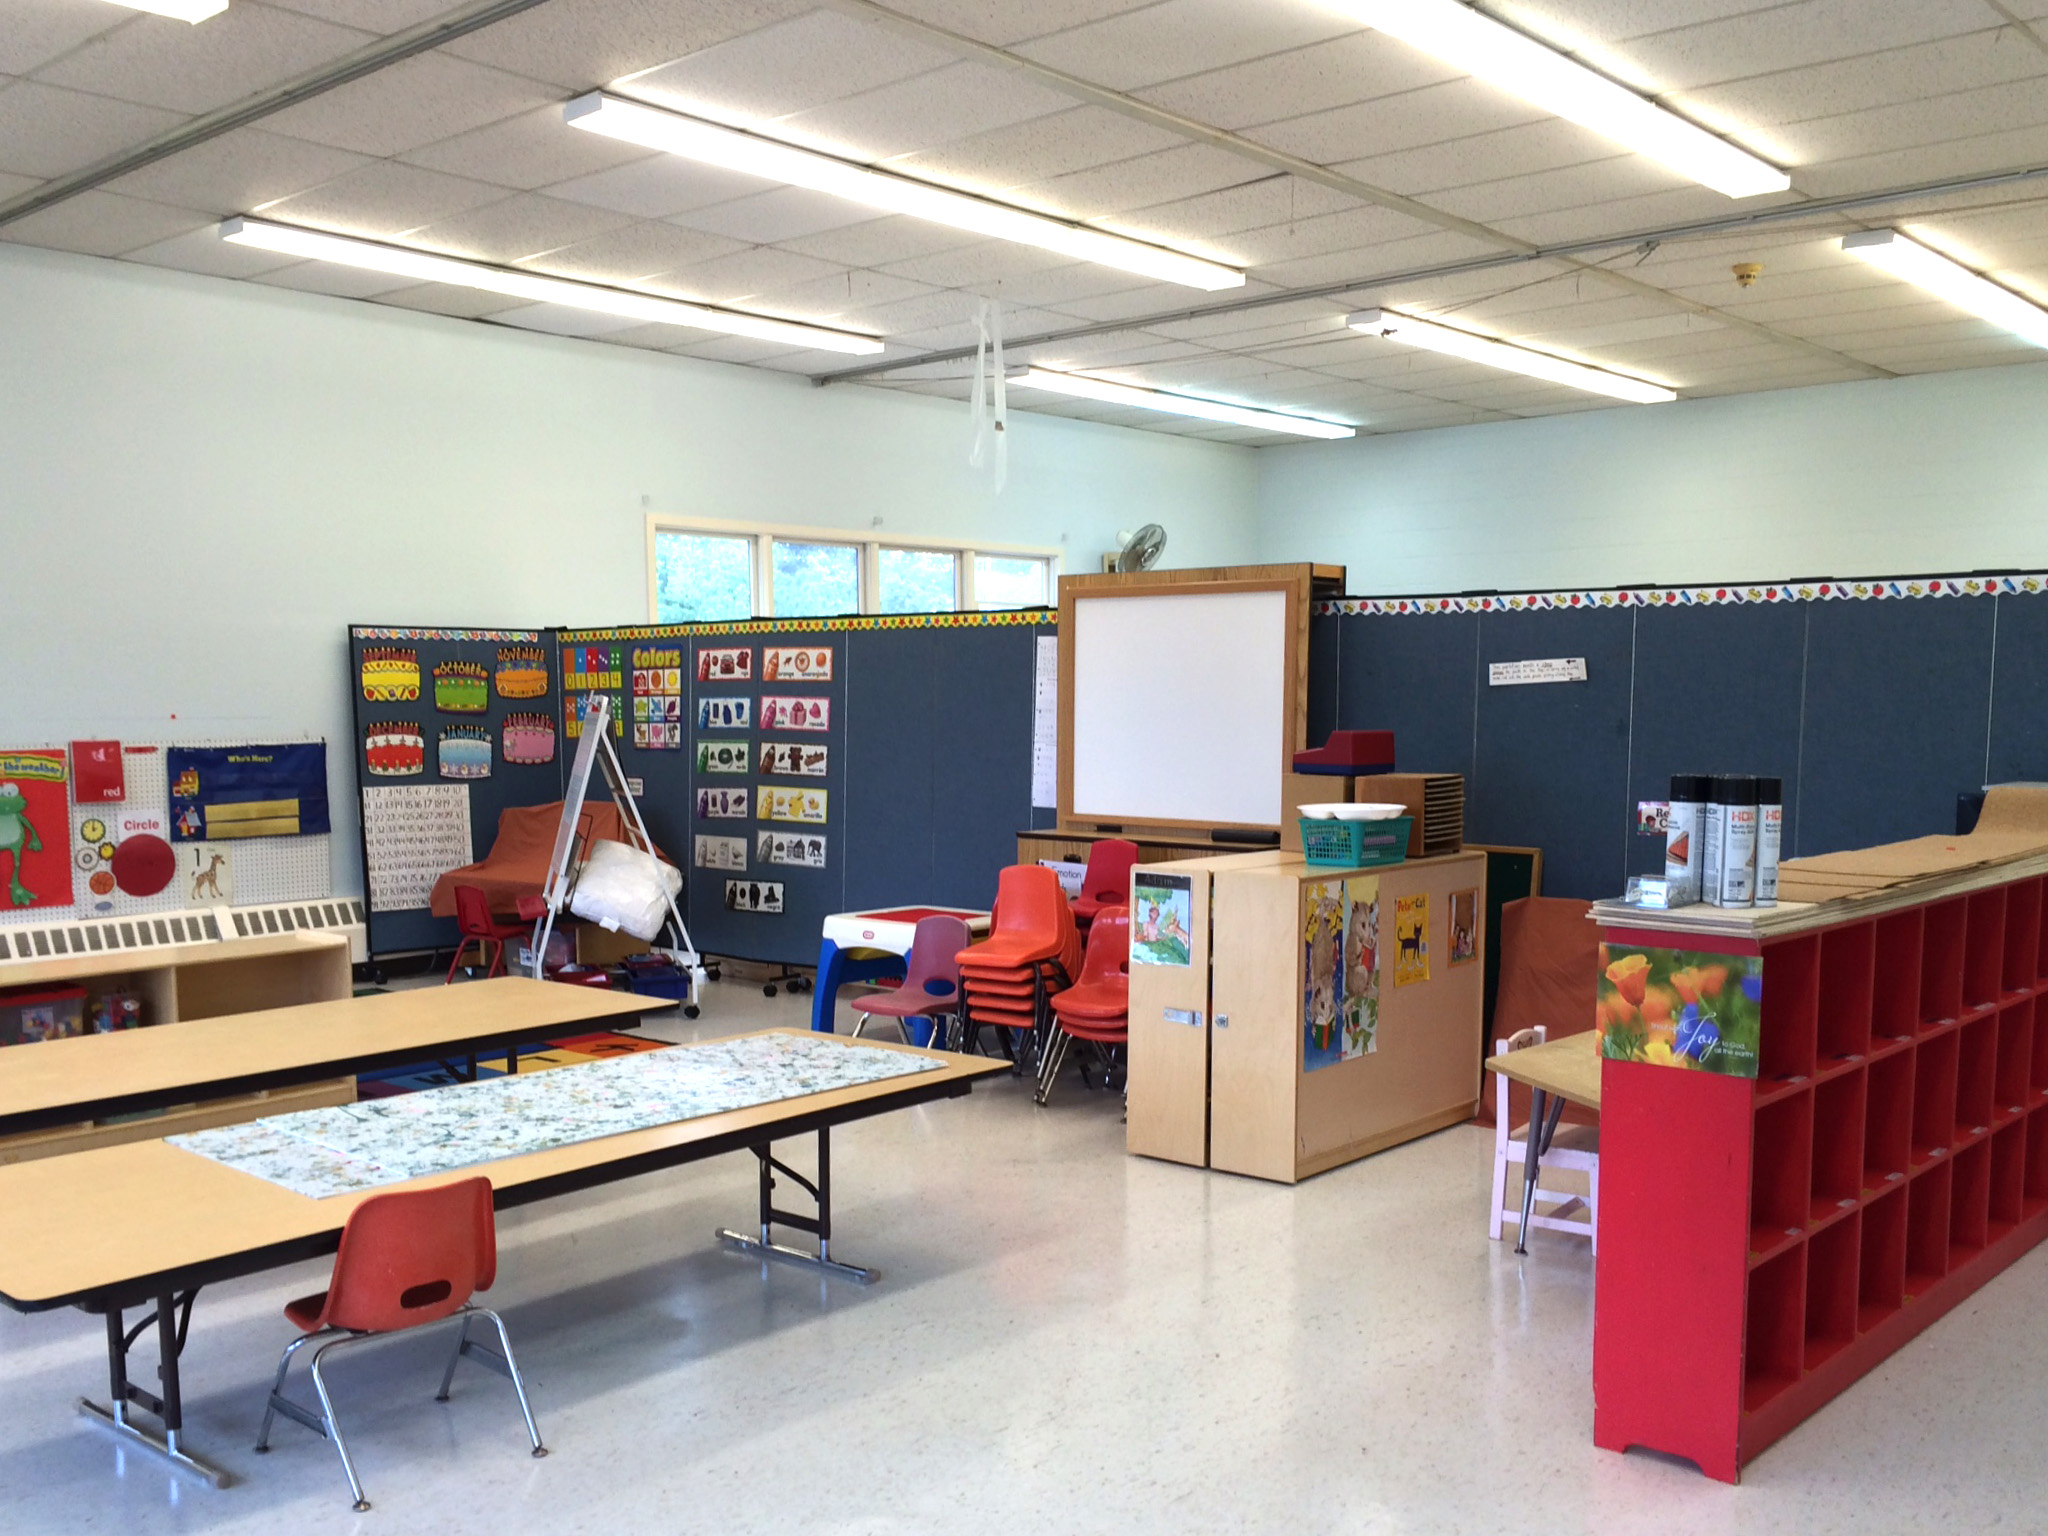 Oak Hill Christian Childcare Rooms created in a large room with the help of portable walls